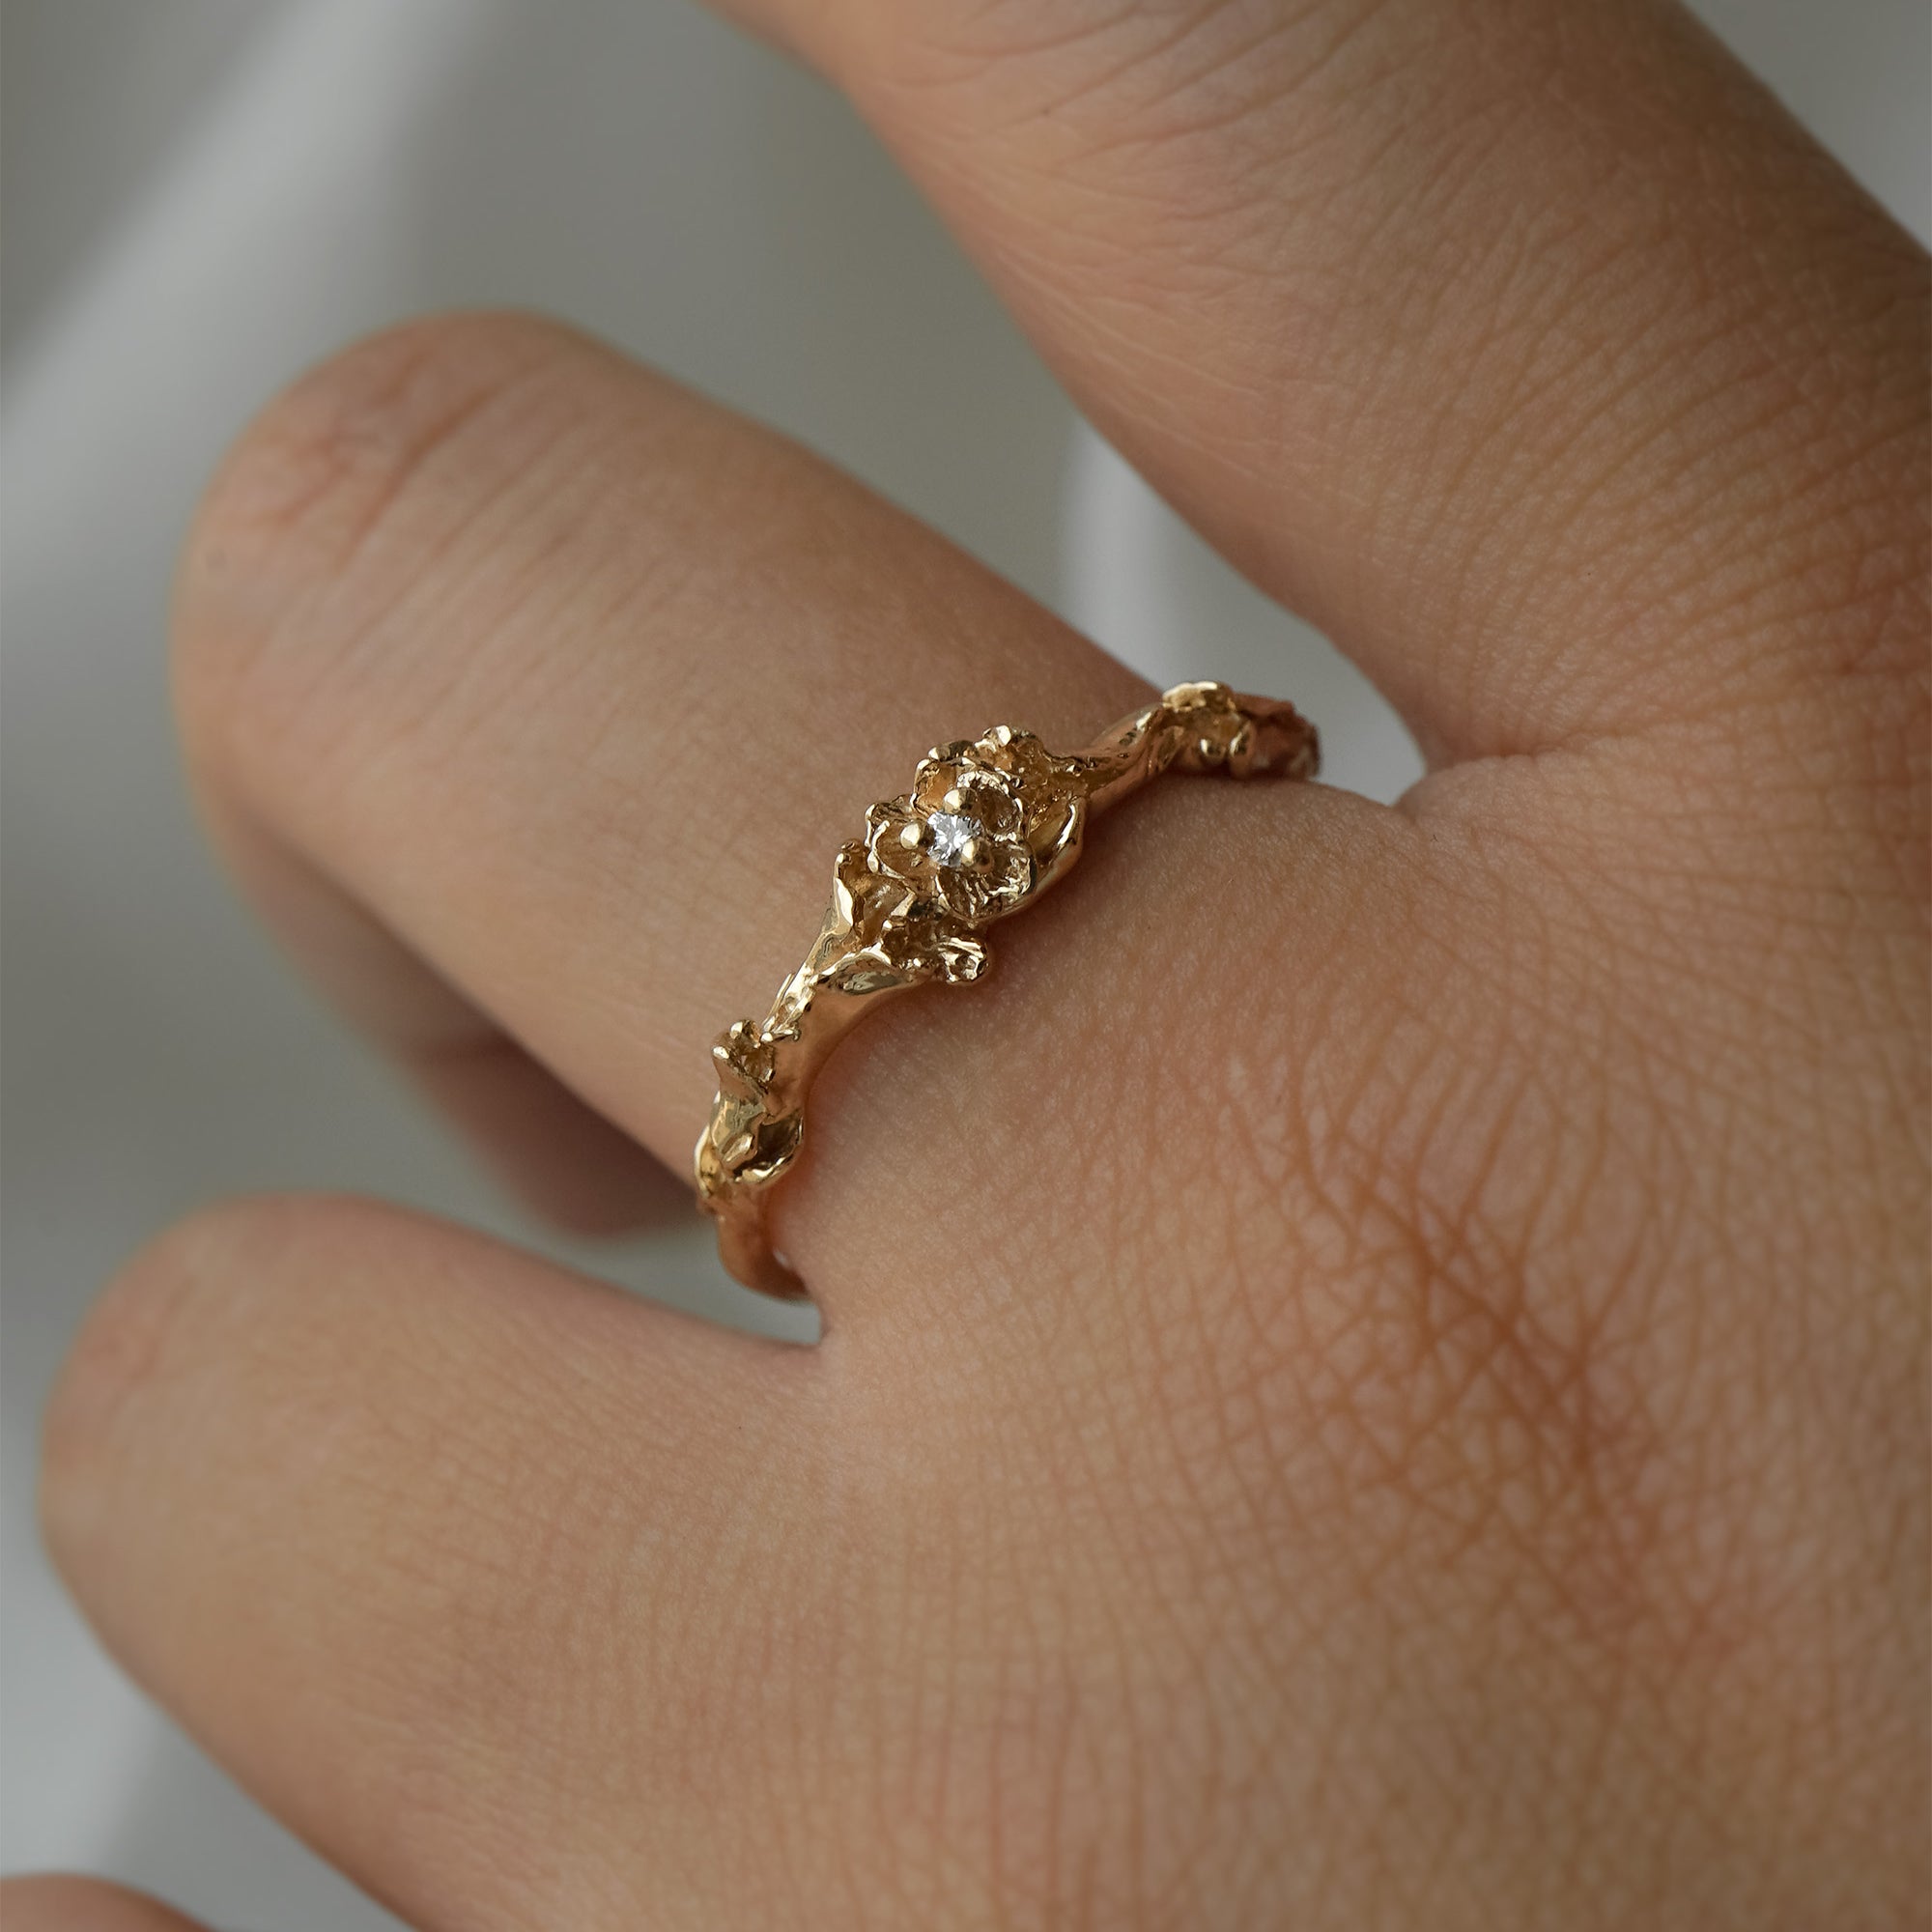 A stock photo of the solid gold "Pansy Signet" ring by Laurie Fleming Jewellery. The ring features hand-carved delicate petals encircling the band, with a tiny pansy flower at the centre, which has a customizable centre stone (pictured with a diamond, available in all birthstones). The ring is worn on a hand against a light grey background.